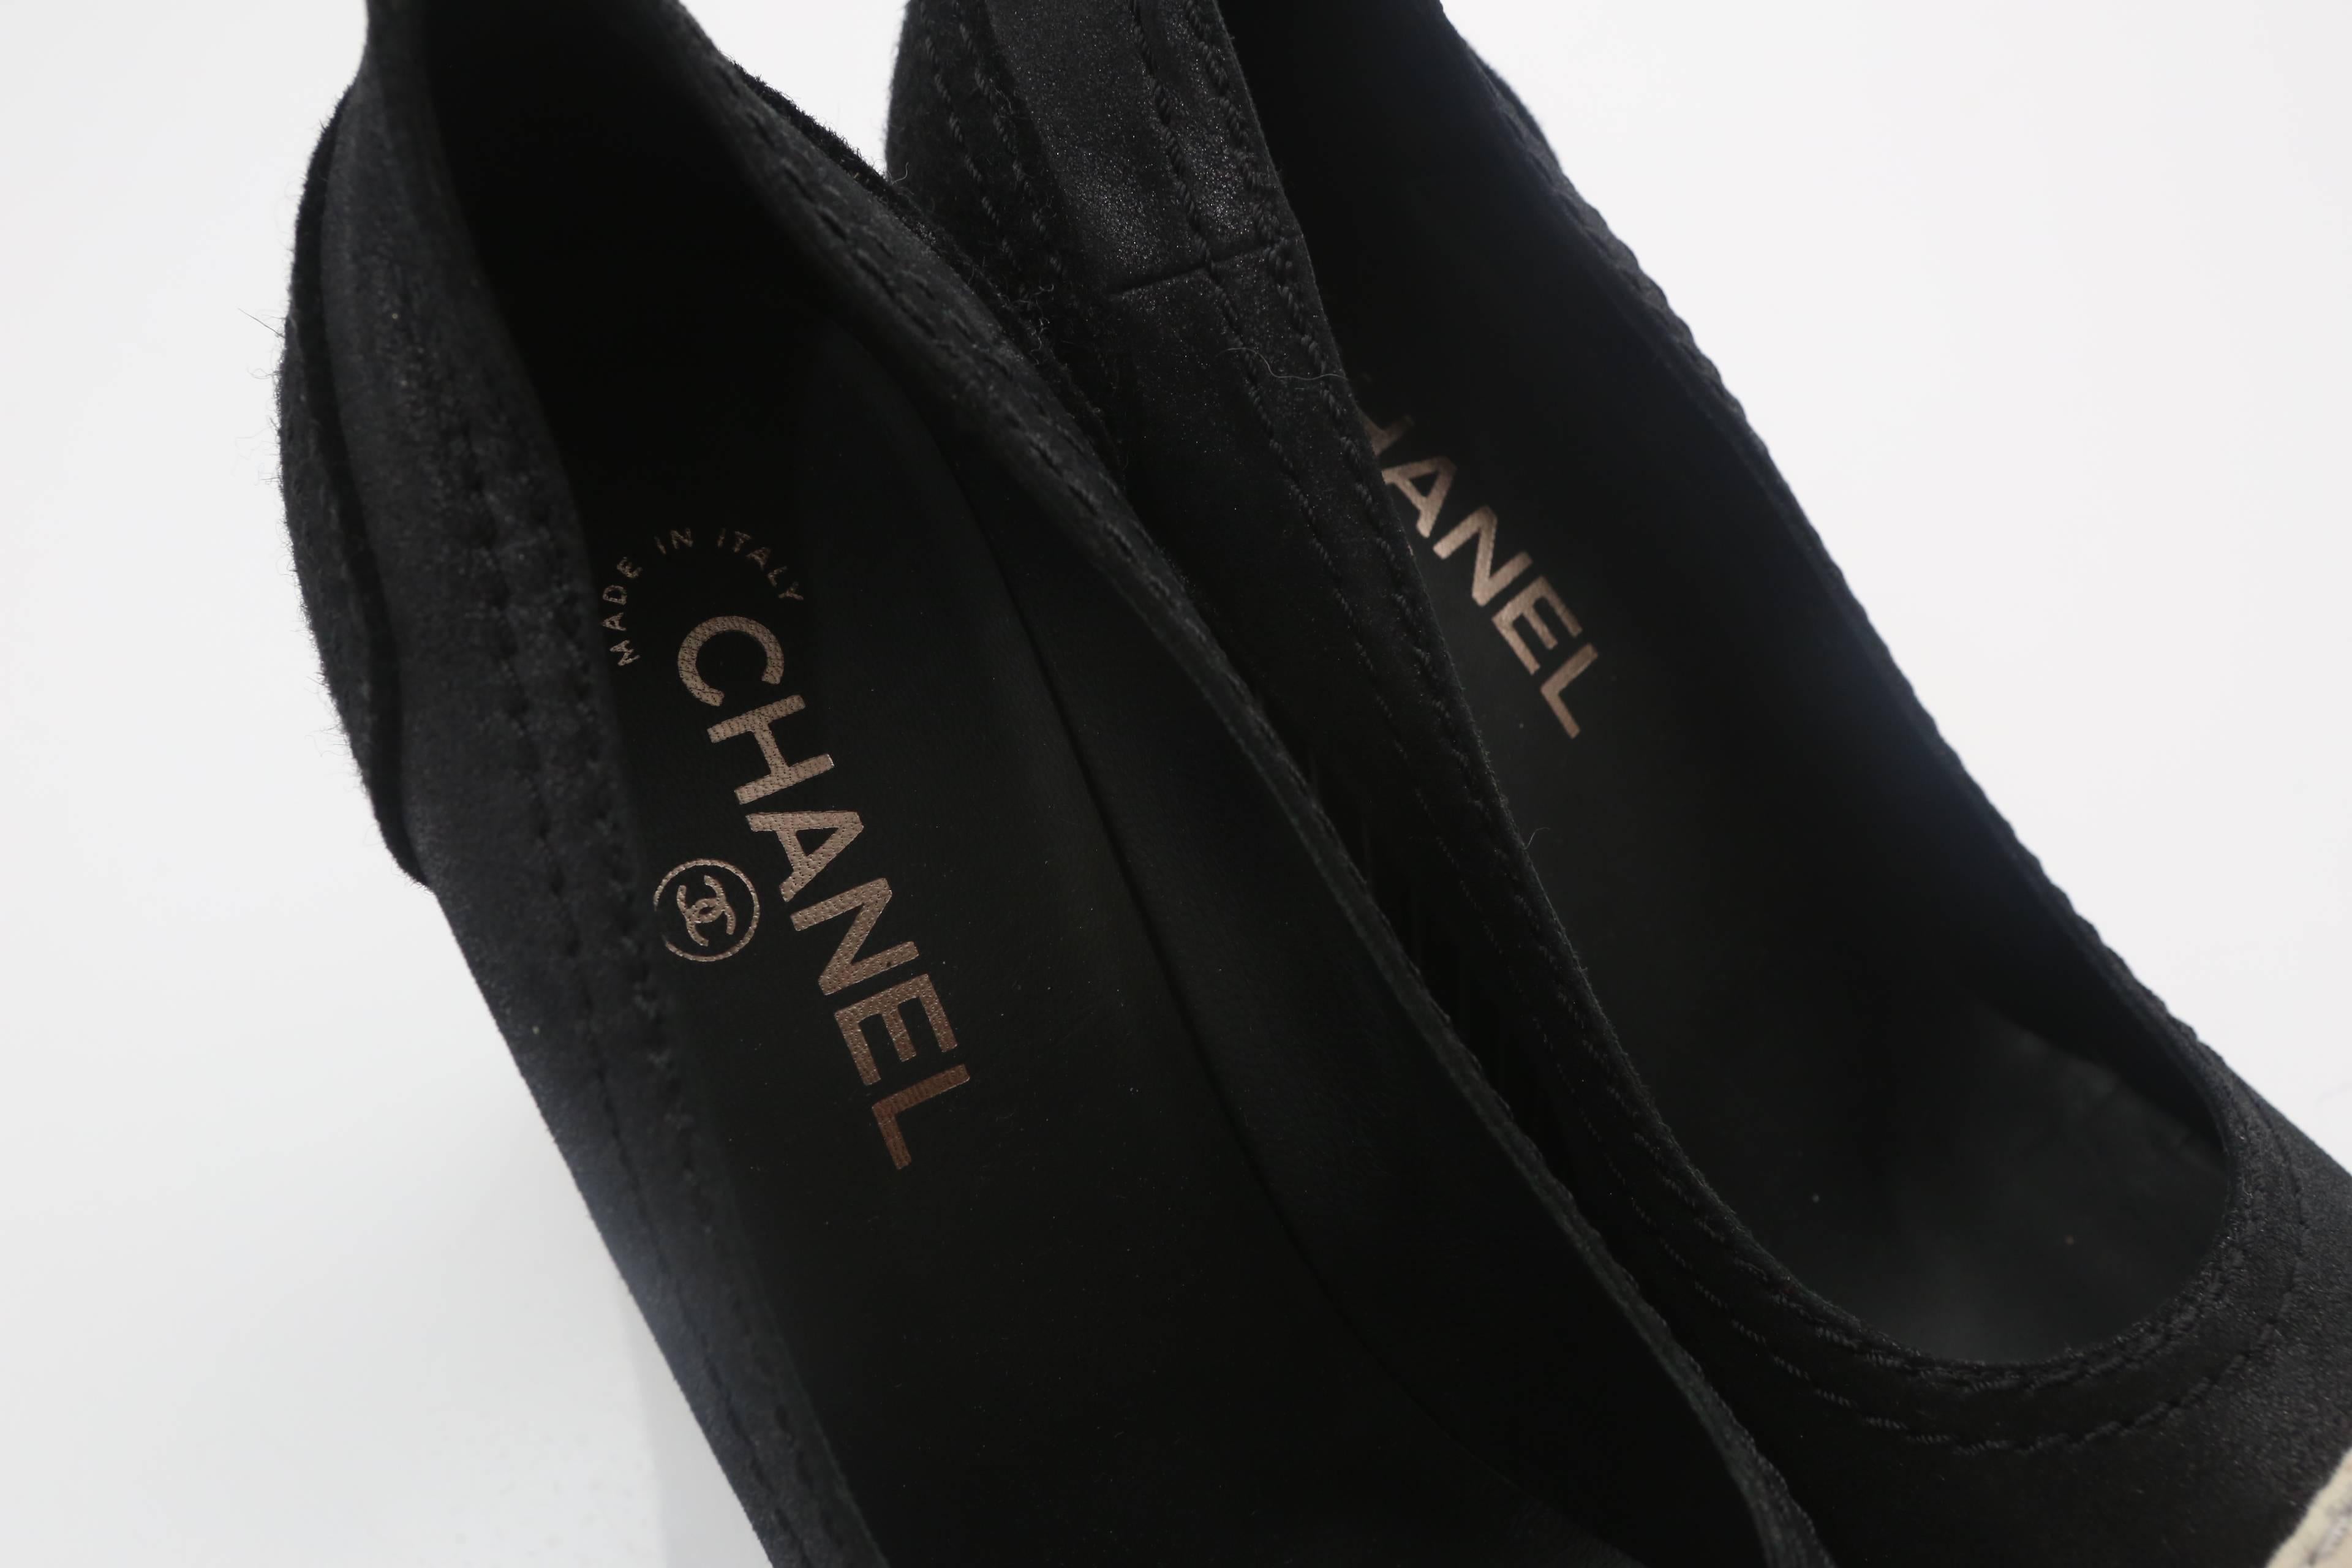 Women's Chanel Black/White Contrast Wedges